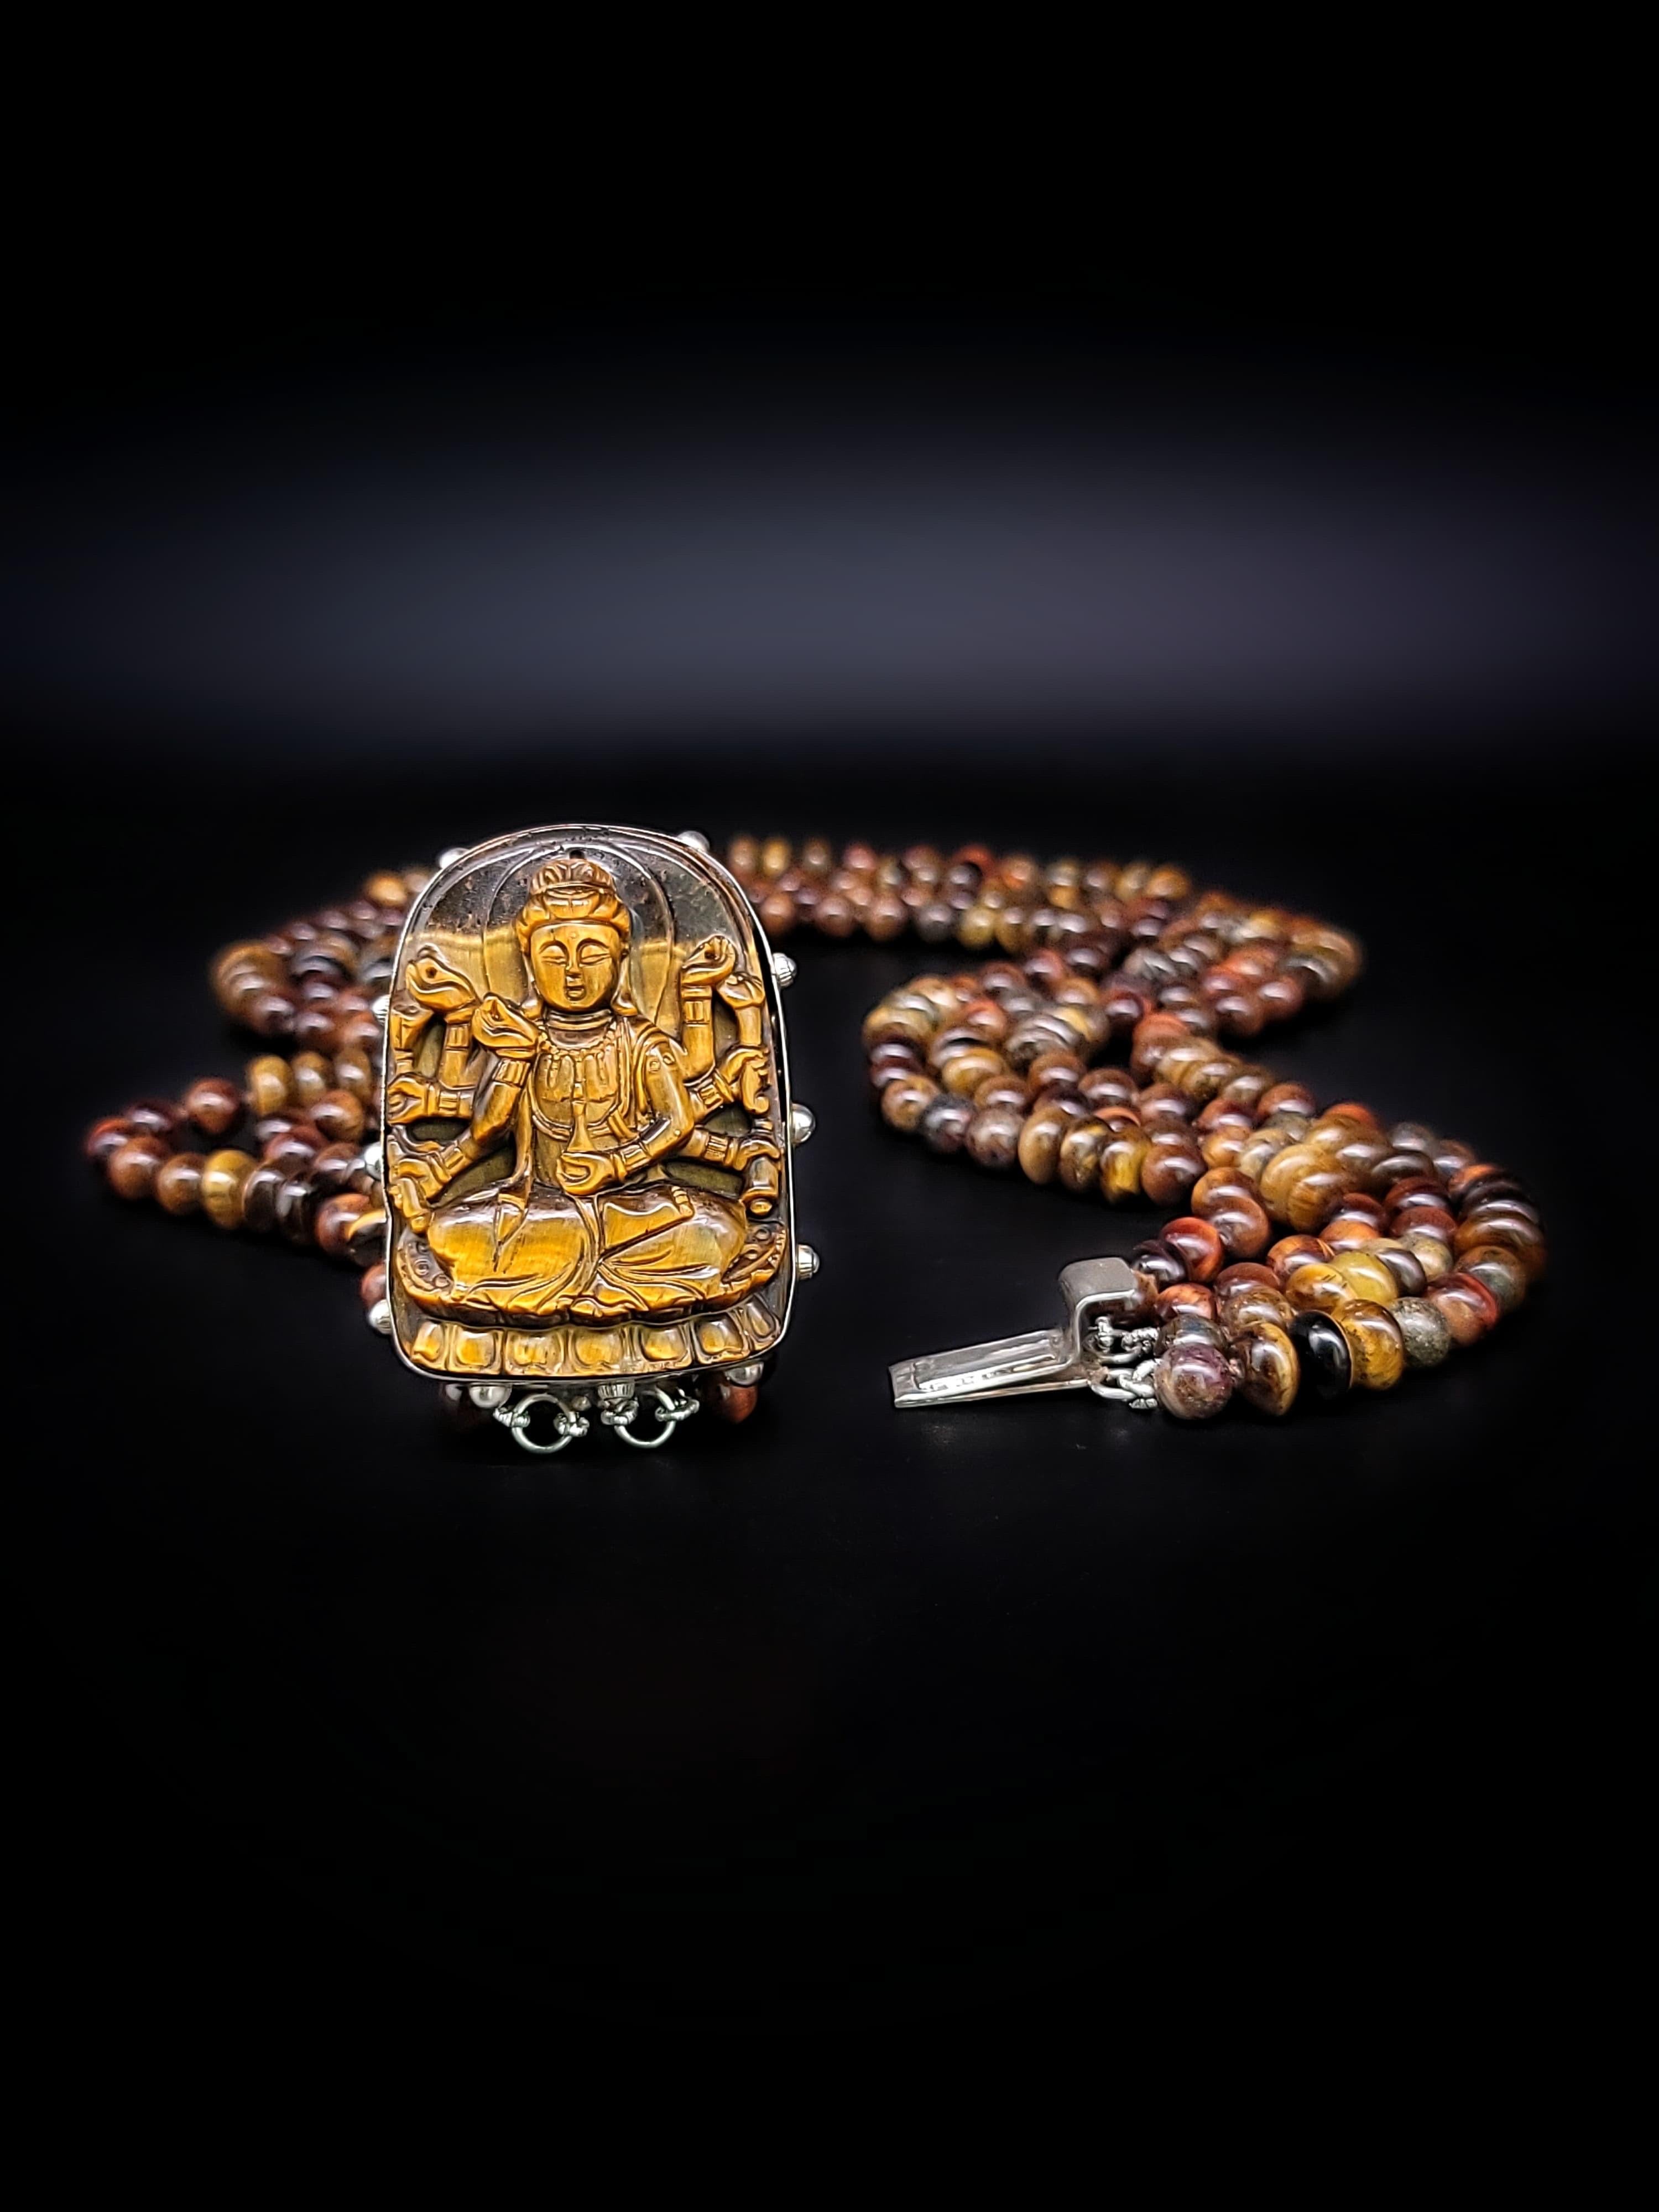 A.jeschel Sophisticated Tiger’s Eye Necklace with a Powerful Clasp. For Sale 2